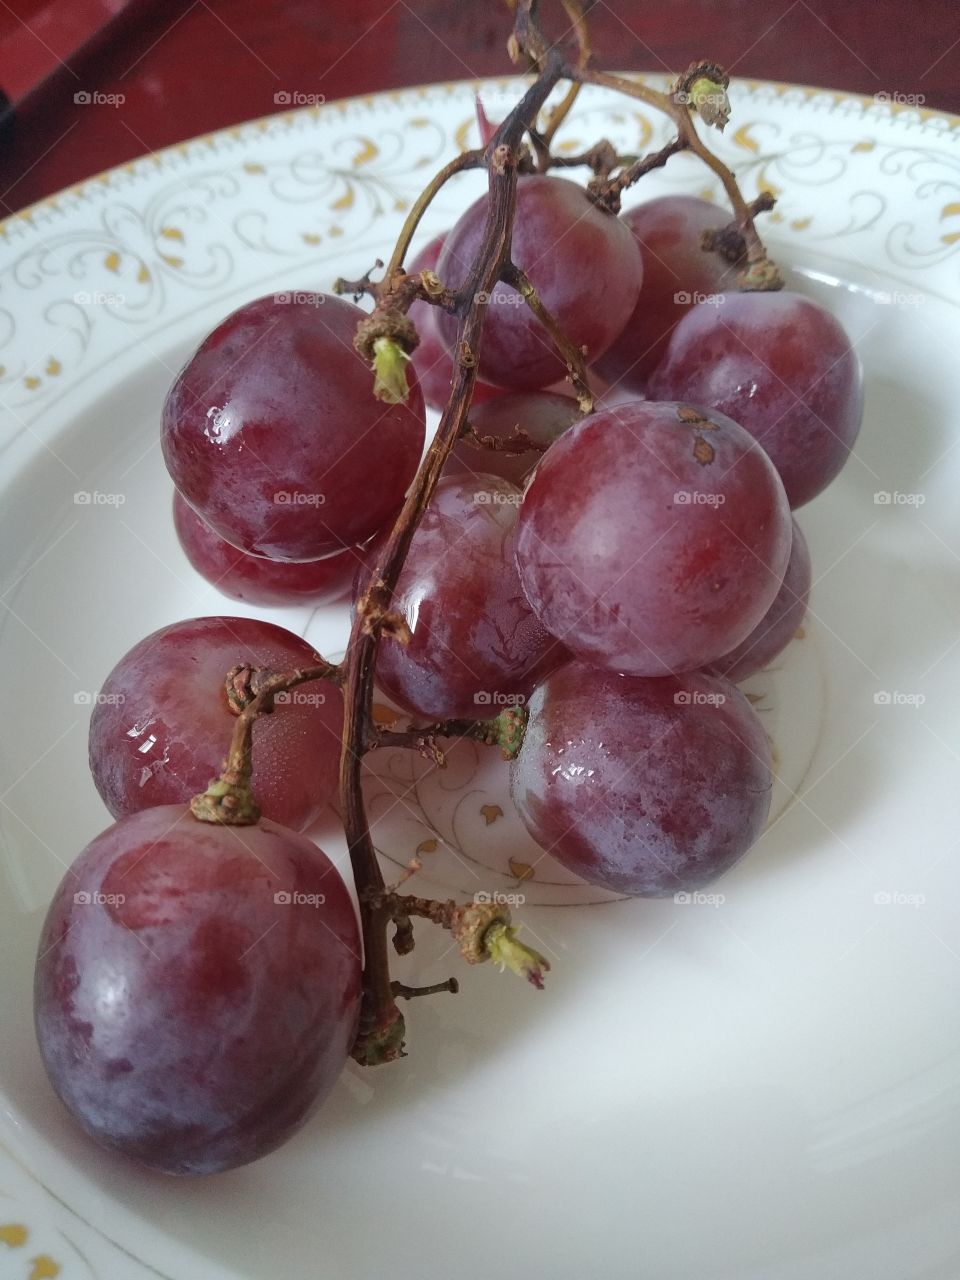 Grapes in white plate